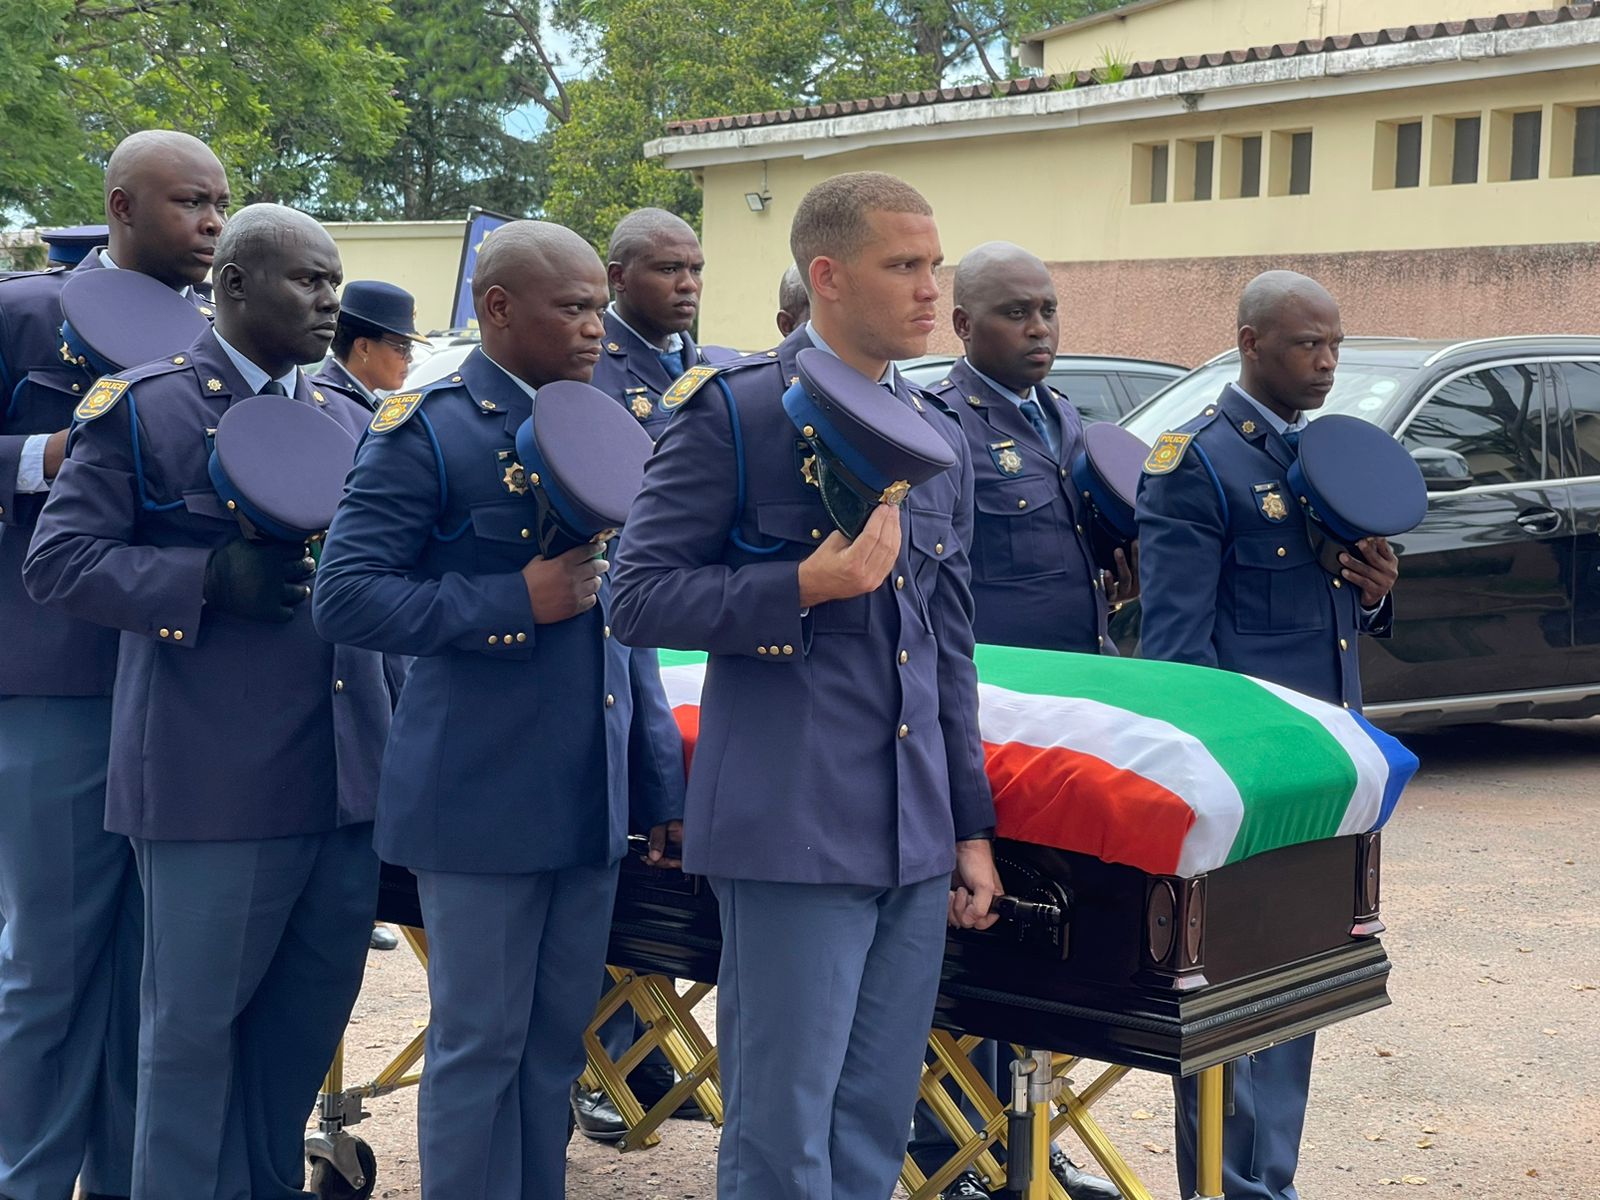 Durban police officer who was killed in M7 truck crash laid to rest